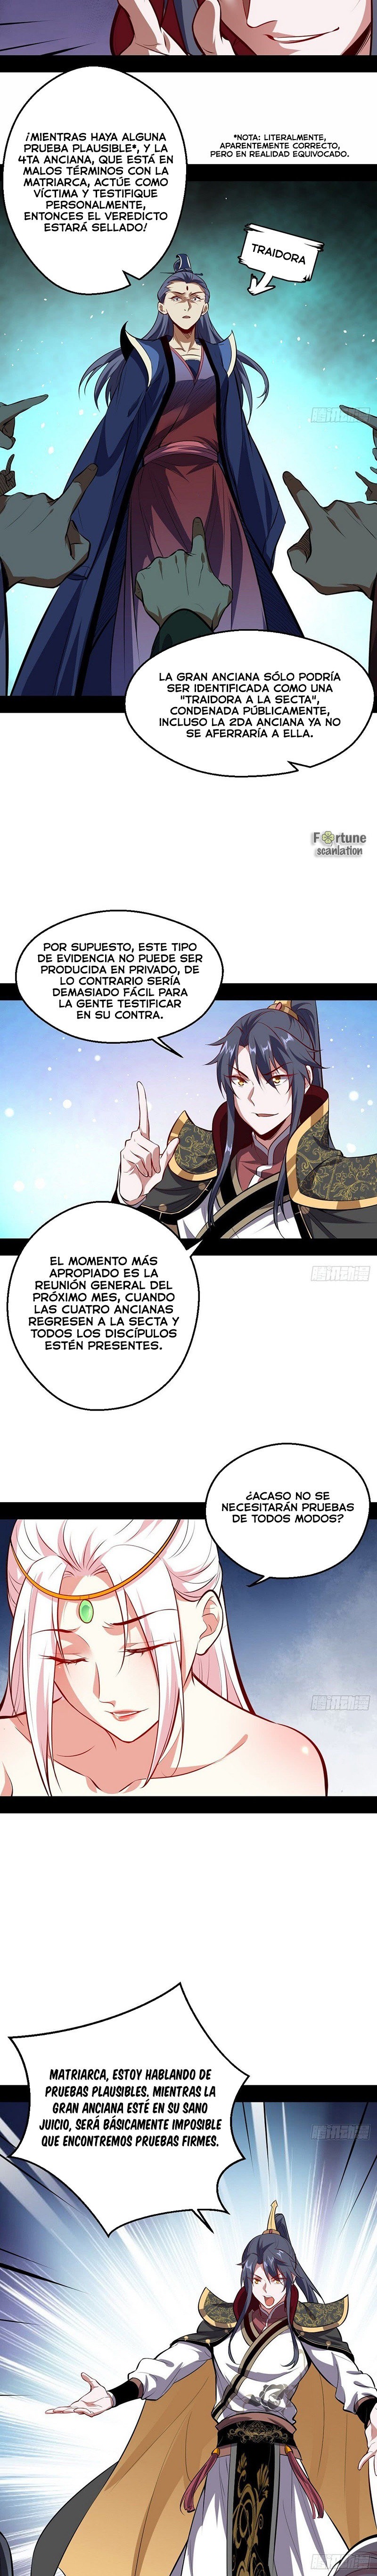 Manga Soy un dios maligno Chapter 40 image number 13